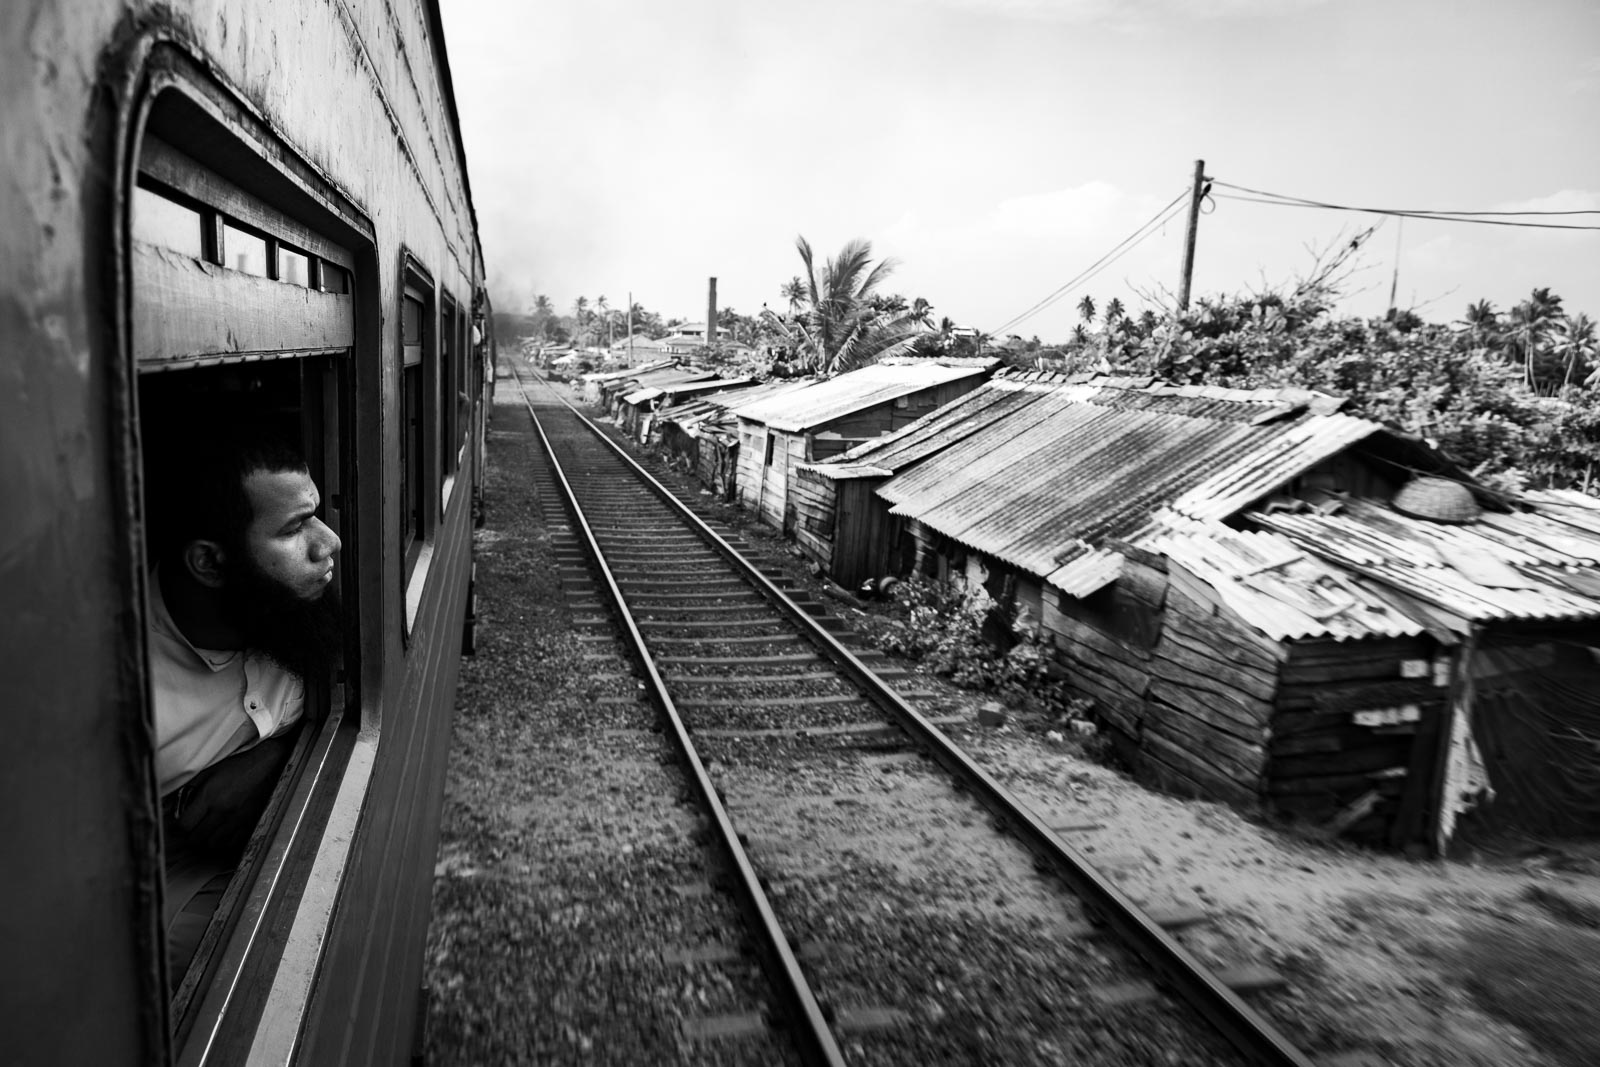 Train to the east. Somewhere in the middle of island on a way to the east coast, Sri Lanka 2014